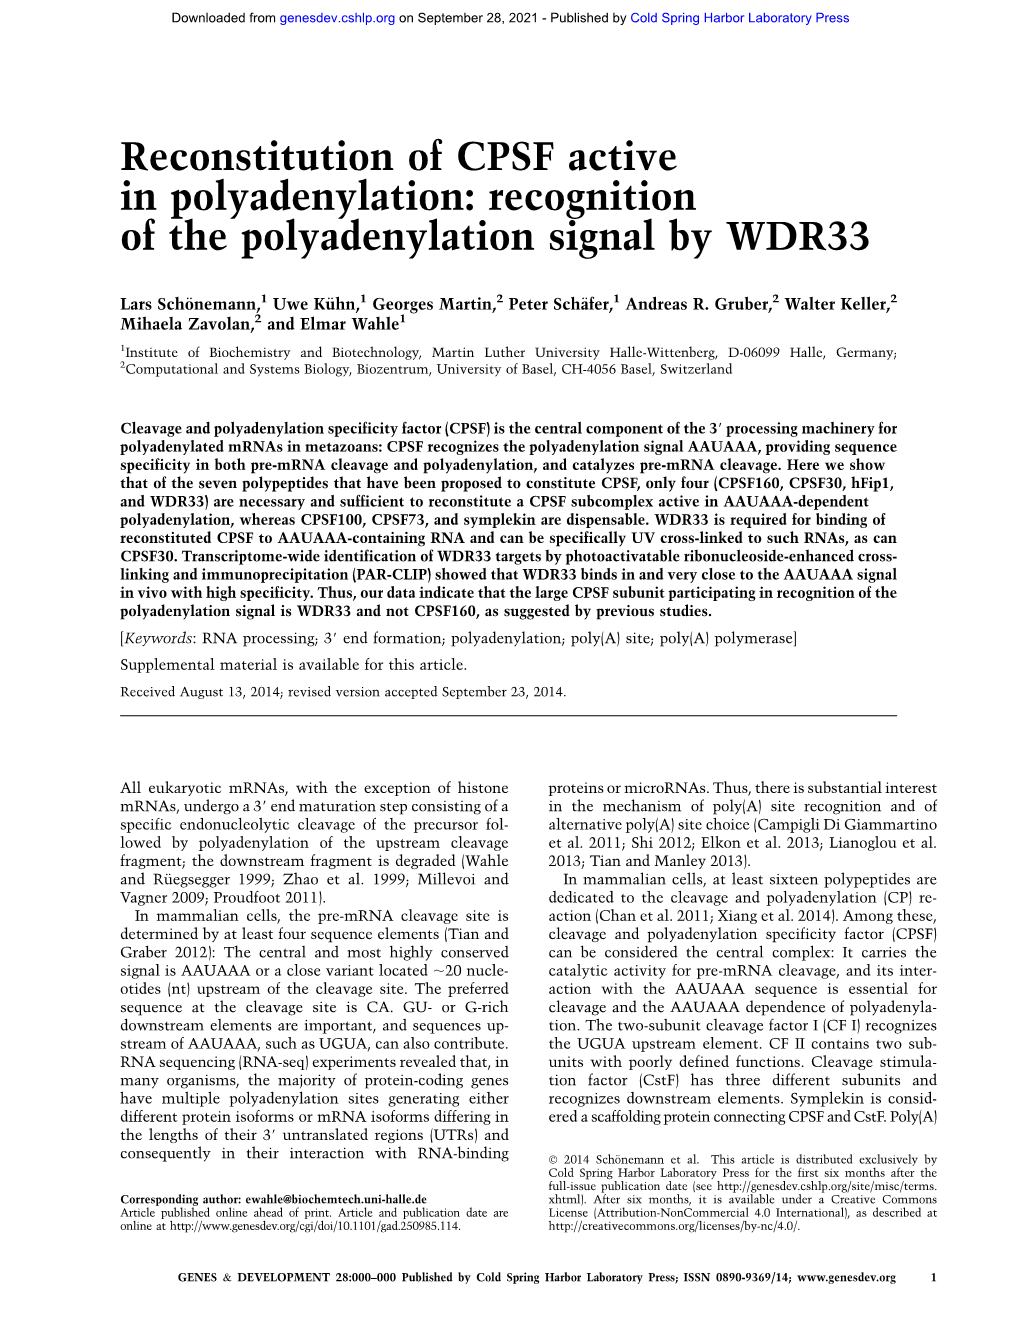 Reconstitution of CPSF Active in Polyadenylation: Recognition of the Polyadenylation Signal by WDR33